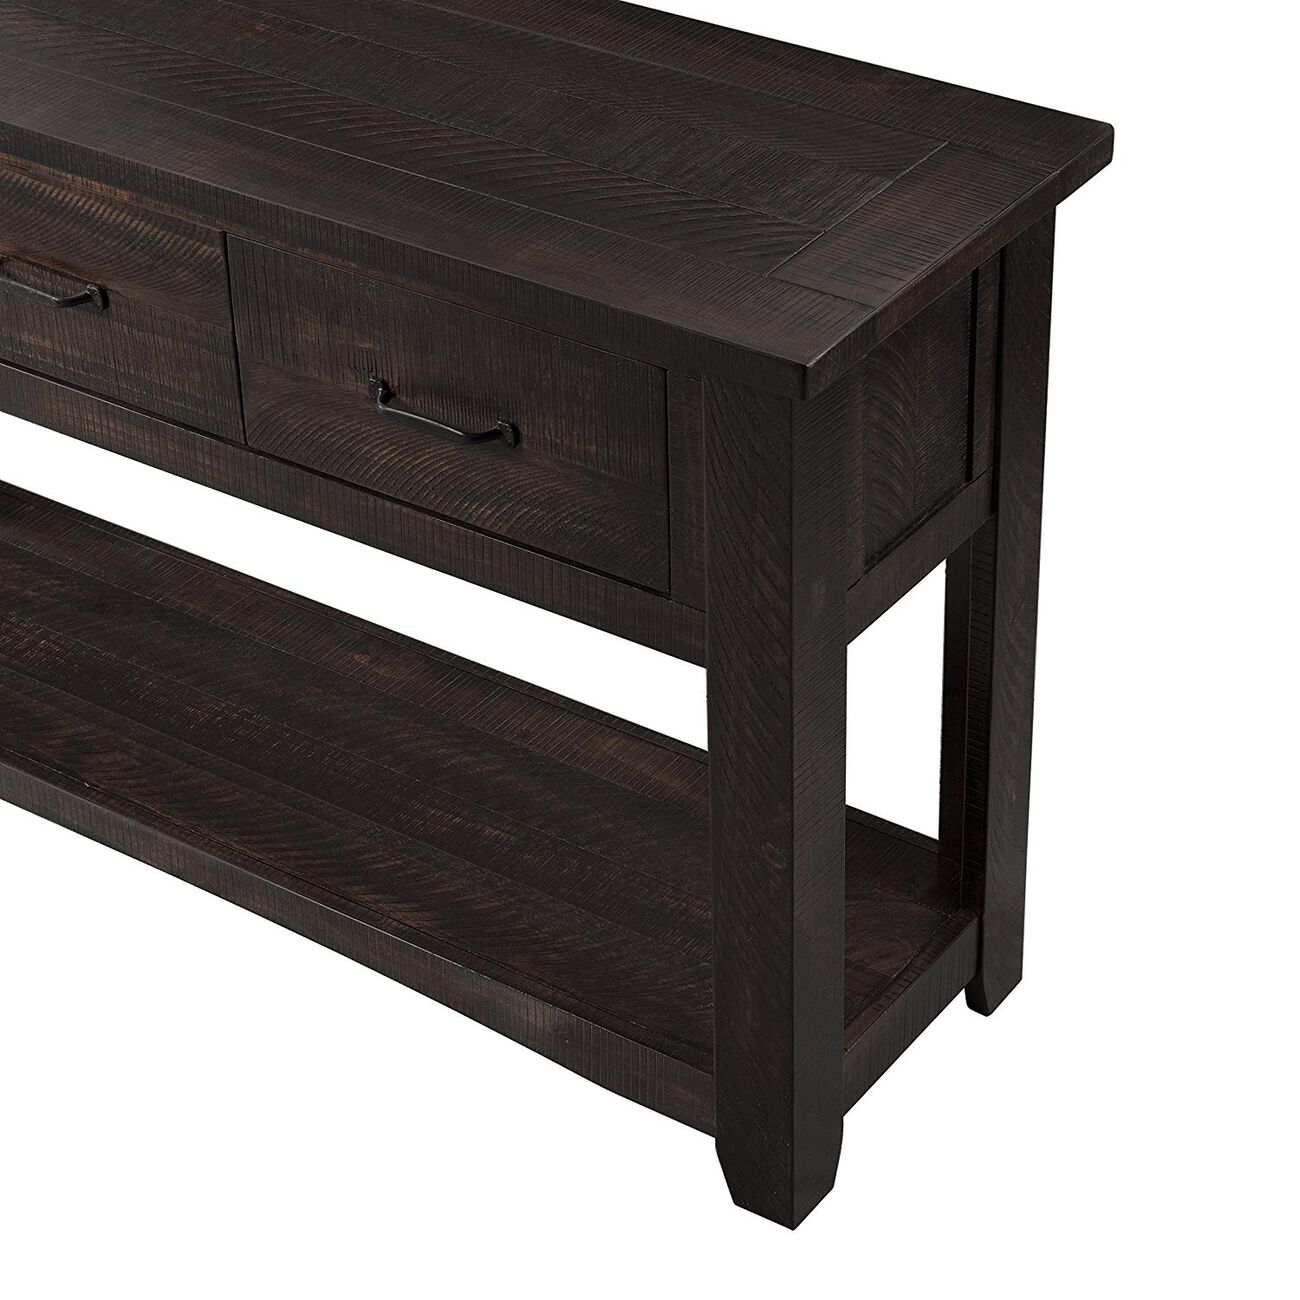 Wooden Console Table With Three Drawers, Espresso Brown